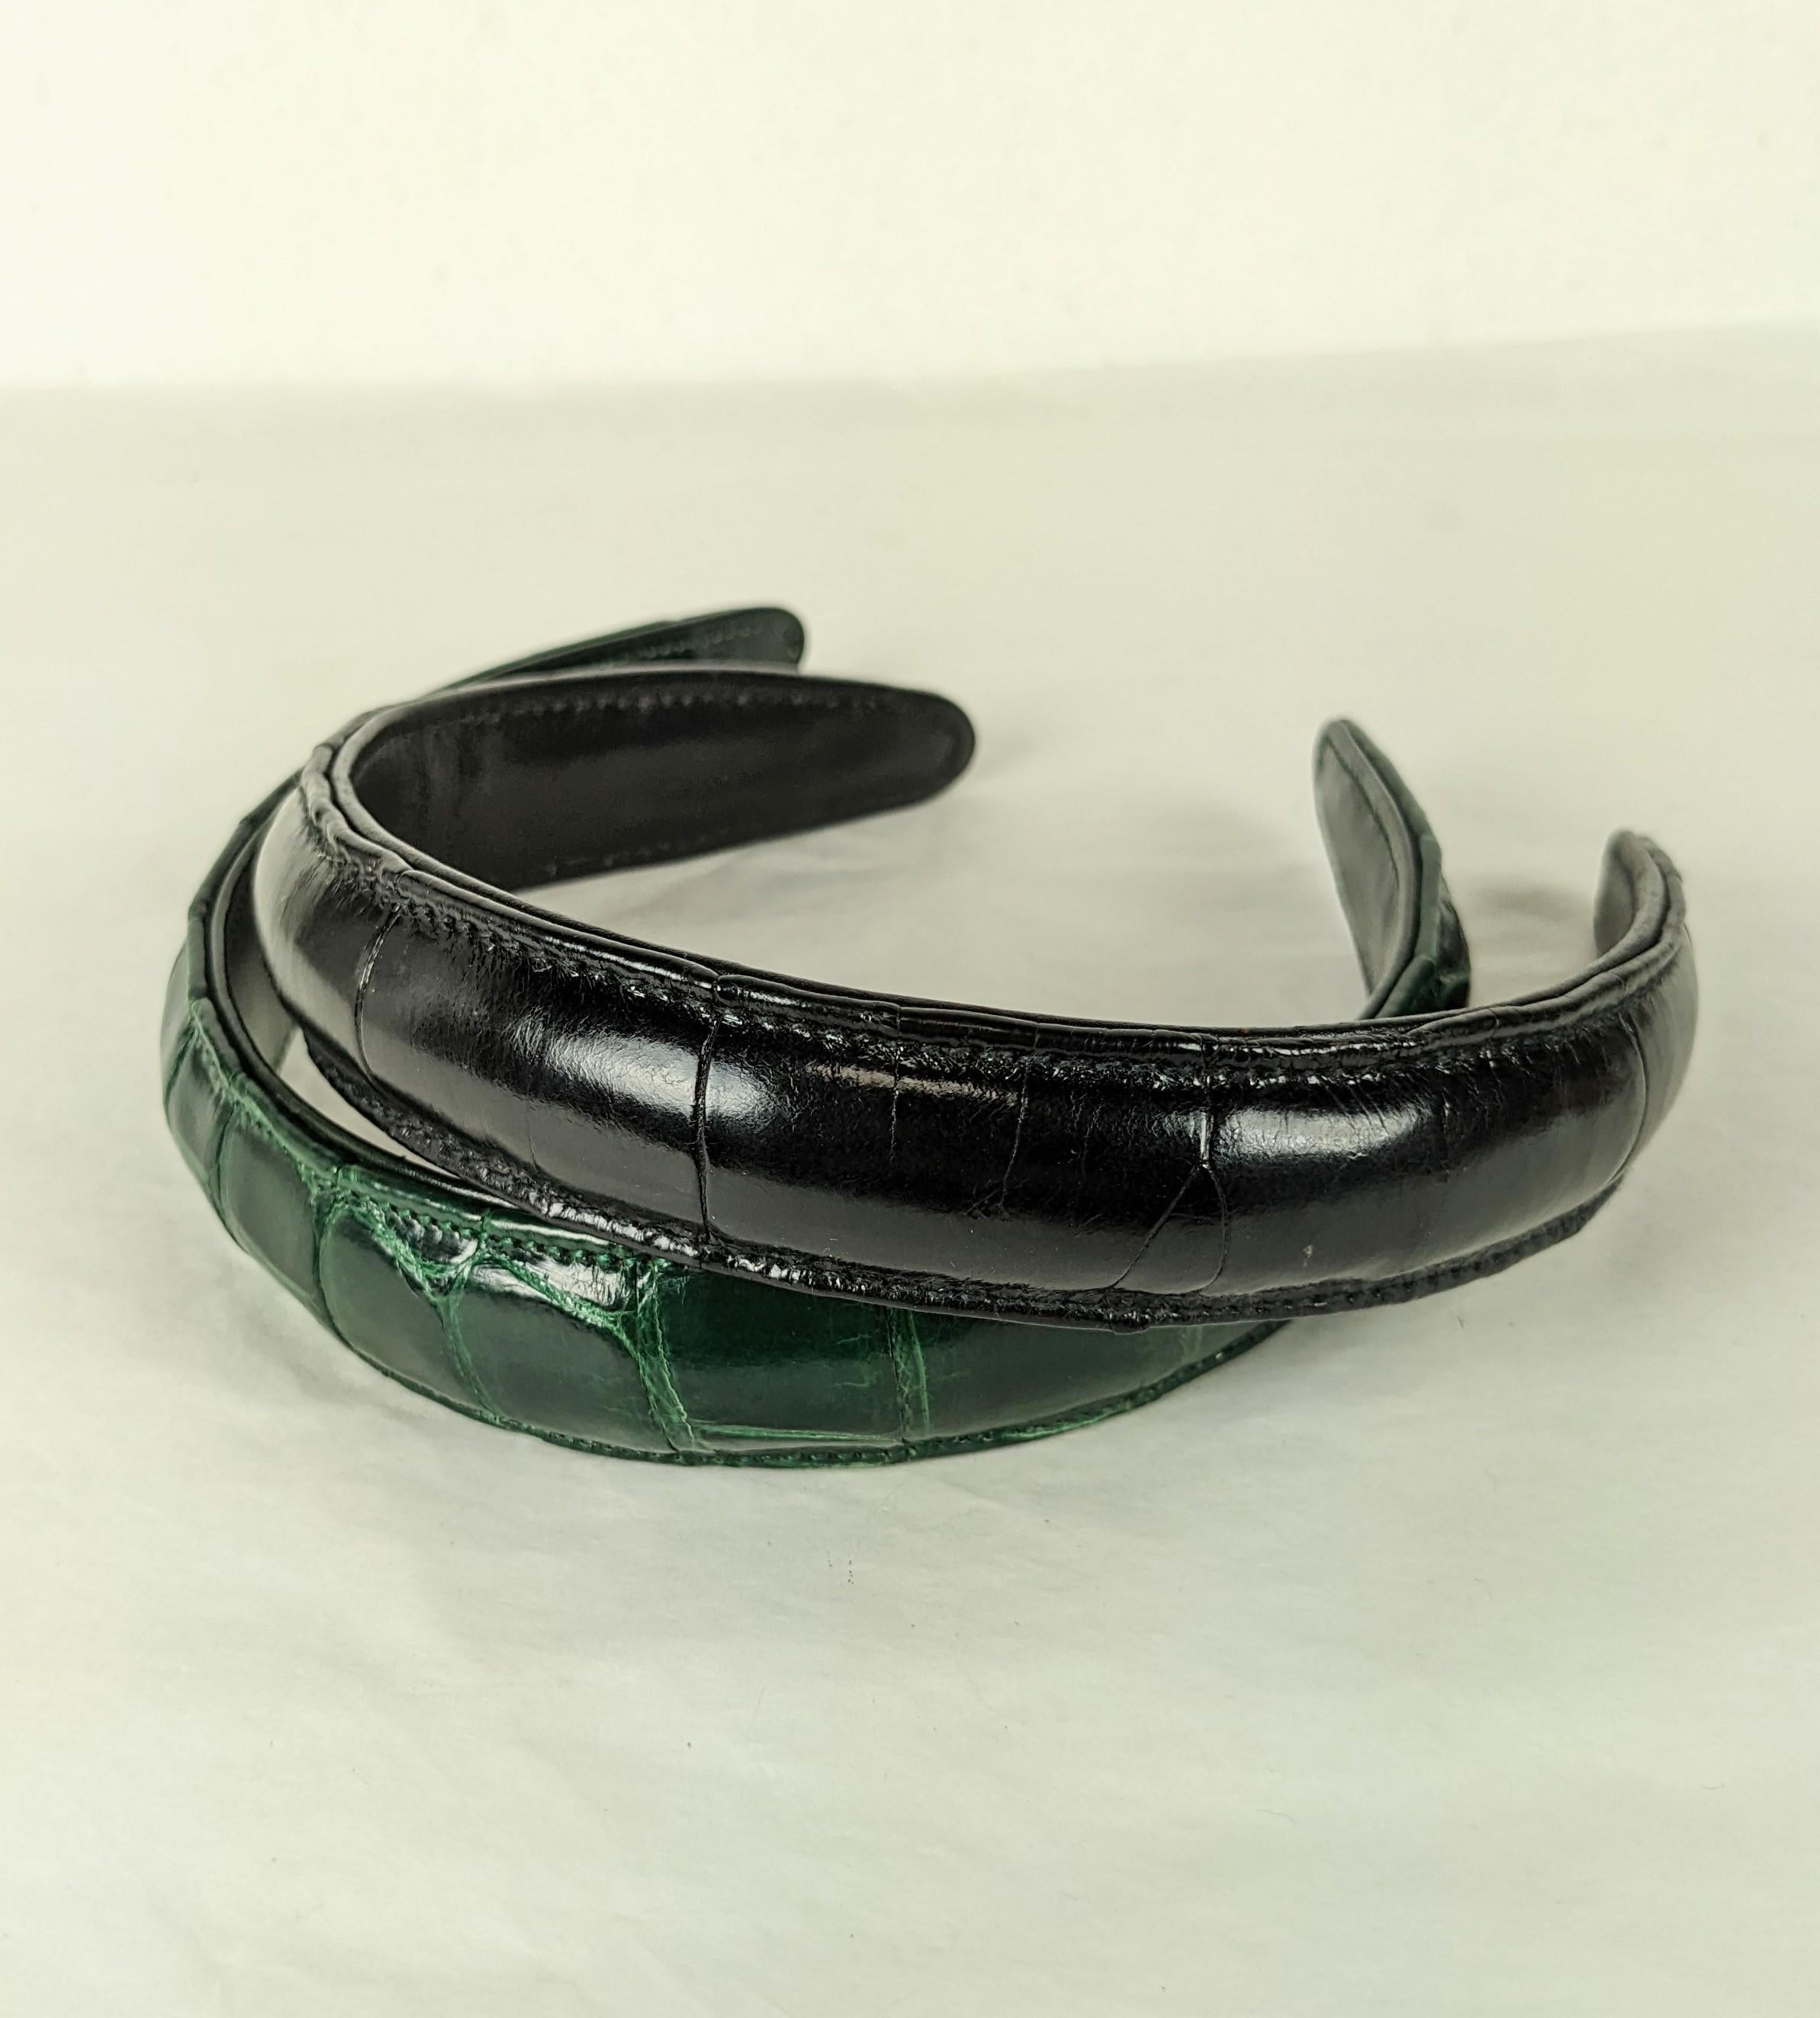 Pair of Alligator Hair Bands lined in leather, retailed by Saks Fifth Ave, 1980's. Deep green and black colorations, slightly padded and topstitched. 14.5